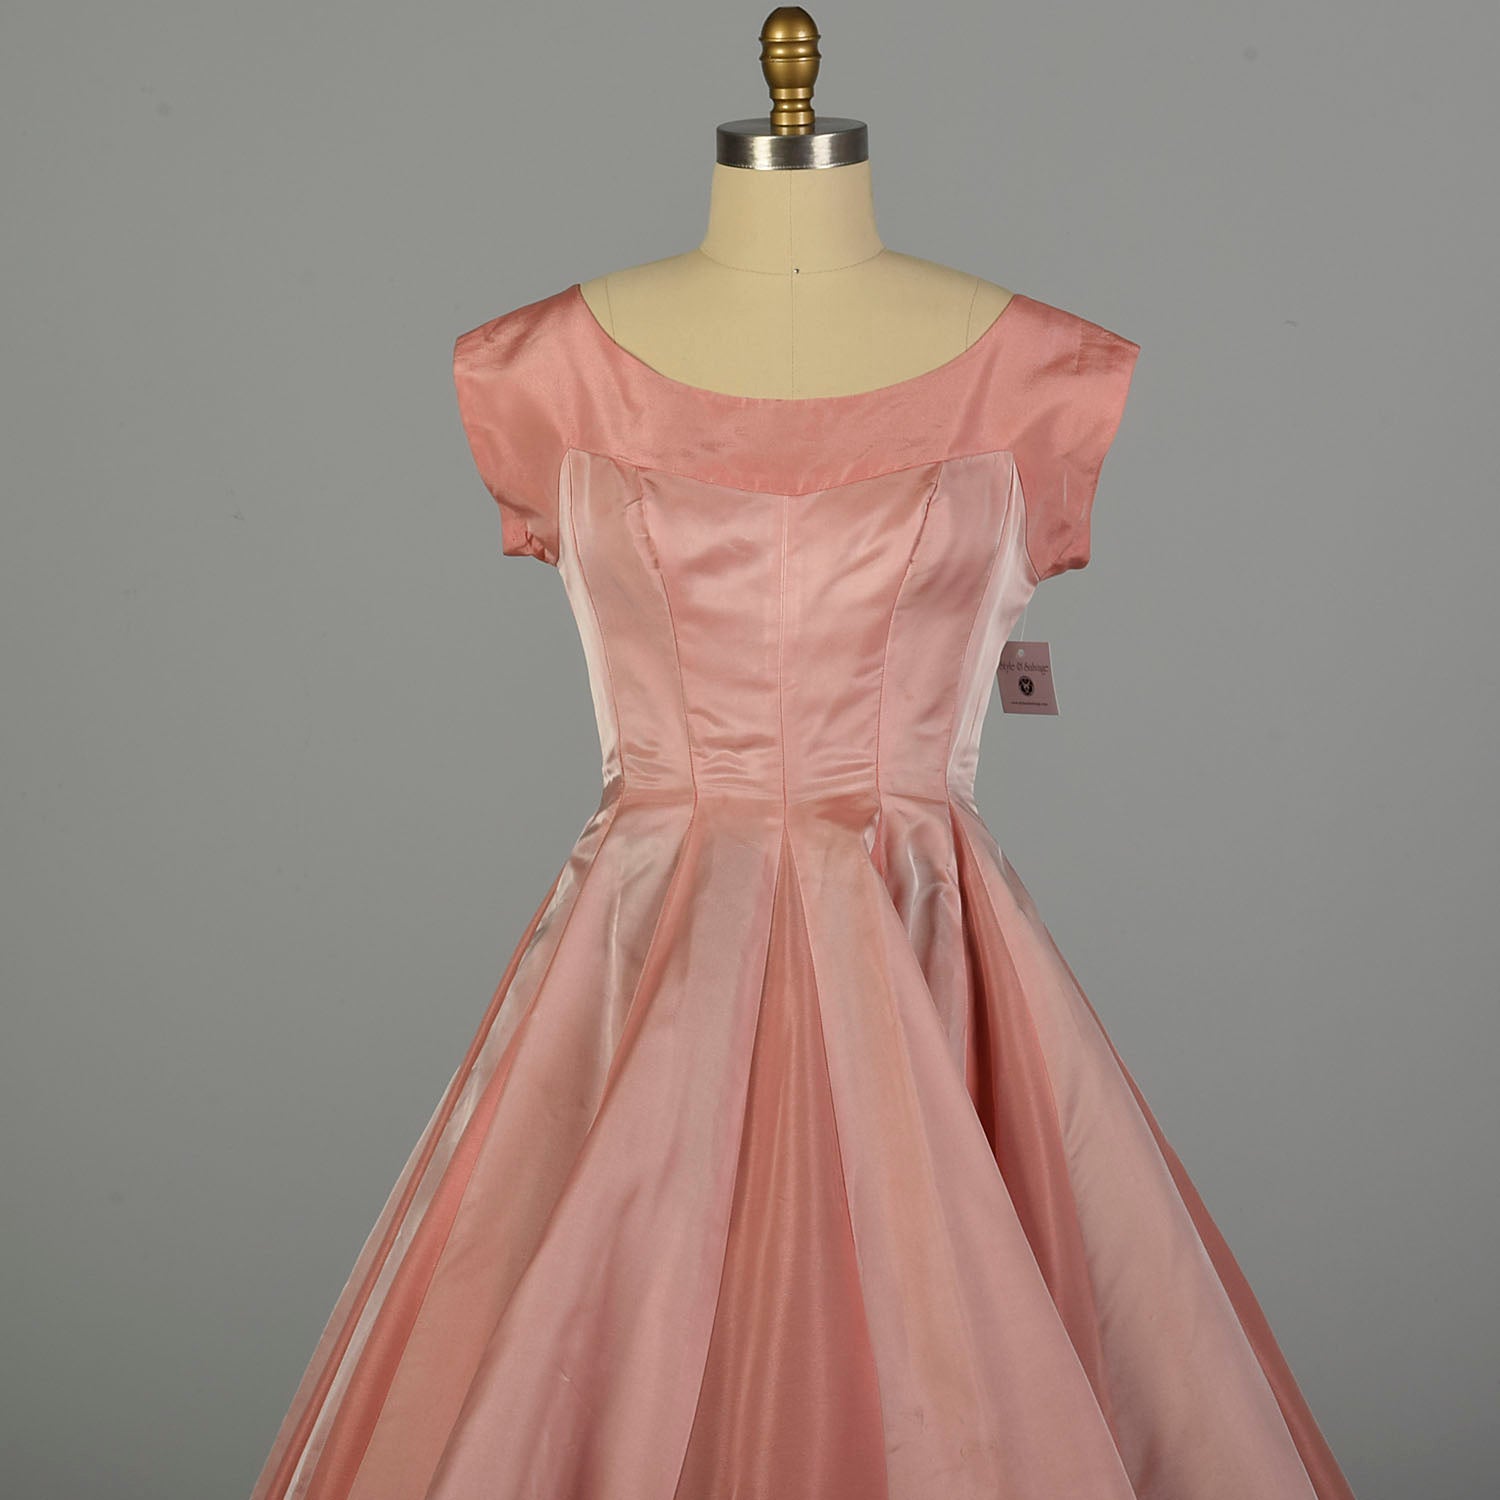 Medium 1950s Dress Pink Fit and Flare Circle Skirt Prom Evening Cocktail Gown